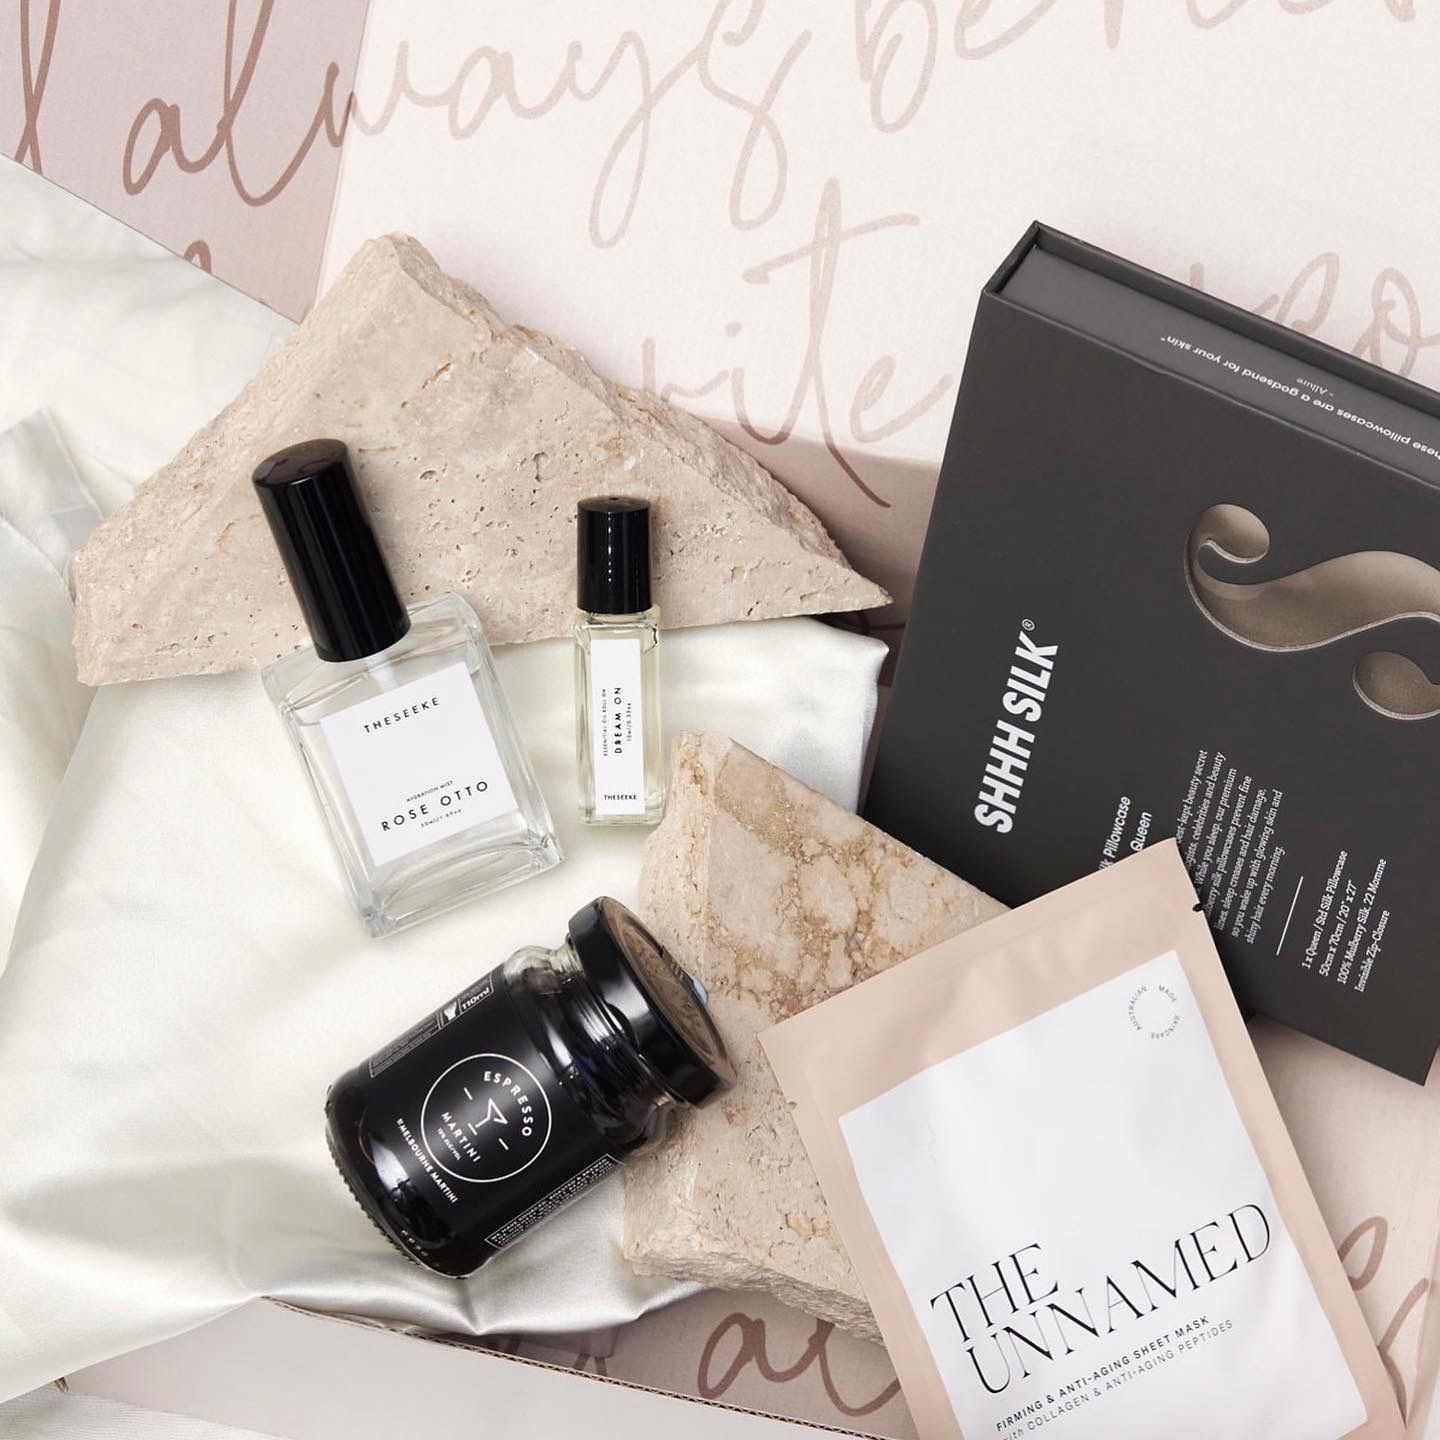 Making Gifting Easy and Delightful with Unboxed Gifting